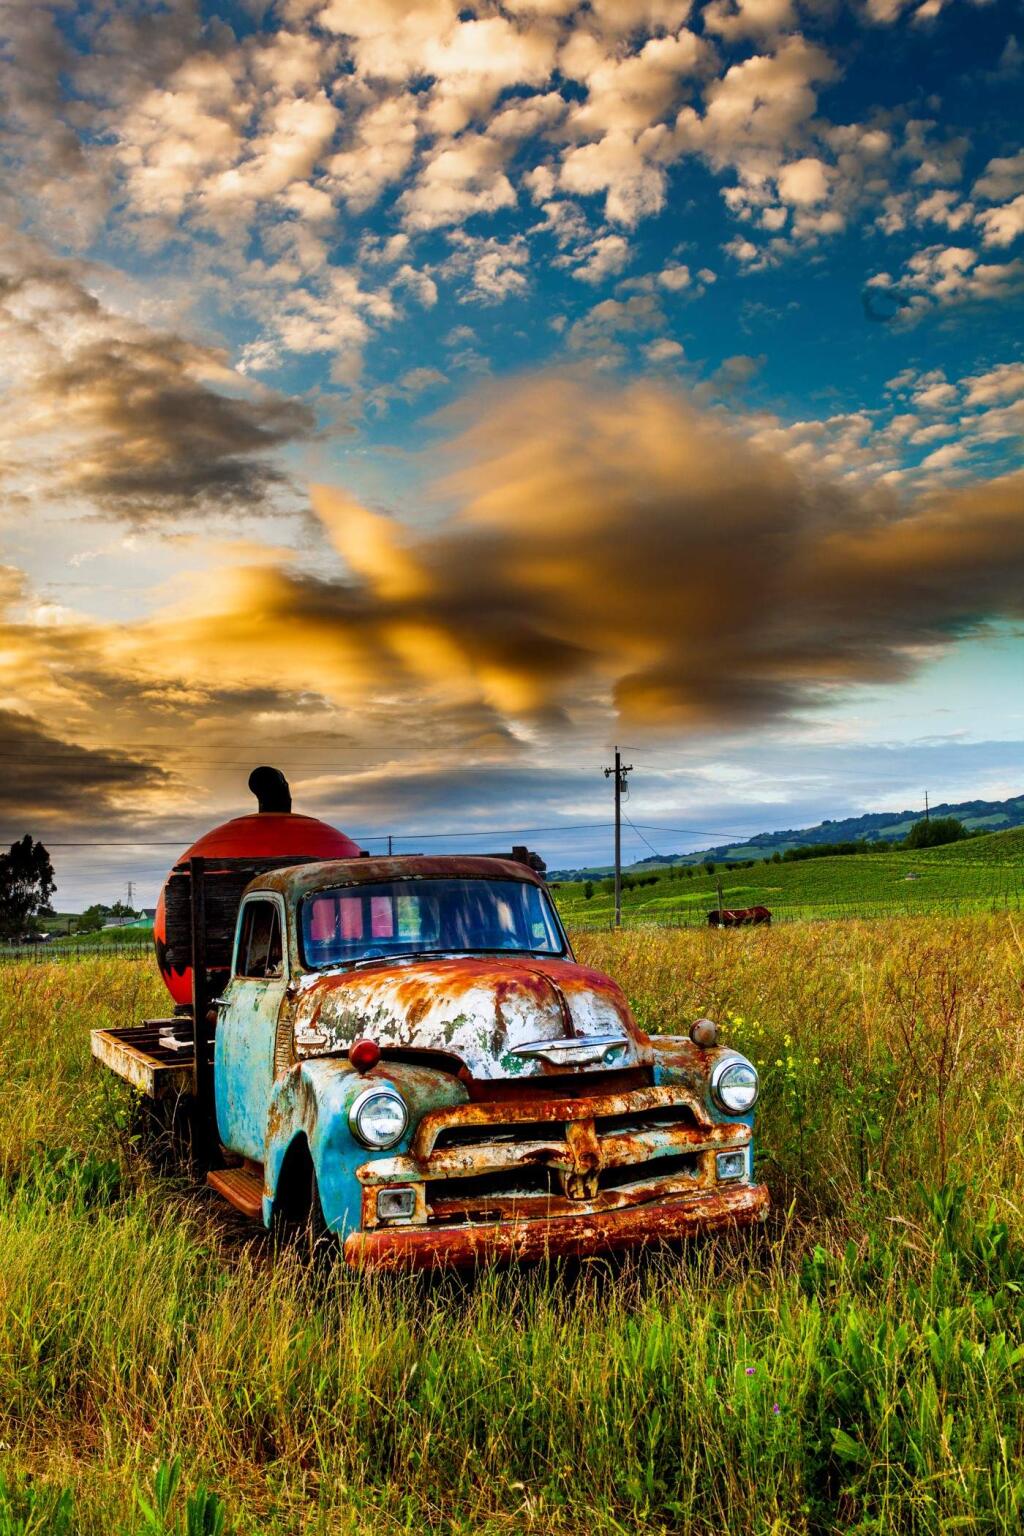 The odd juxtaposition of this achingly gorgeous sunset (a winter dusk blossoming across the sky with fiery, cottony clouds hanging over the hills and fields of Petaluma) and the old colorfully weathered truck (with its enormous metal jack-o-lantern in the bed, familiar to many who drive the back roads between Petaluma and Sonoma), is a potent reminder that nature claims everything, eventually. And that decay, when properly lit, can be beauftiful.'The photo happened to be taken just after sunset, while I was driving in from Sonoma,' says Bob Tradewell, describing the shot he took in early April. 'That truck's been there a long time. However, I hadn't seen that particular condition before, with the particular way the sun was coming up behind it.'Asked what he finds most appealing about this little part of the world, Tradewell answers the question through the lens of a decidedly humane perspective. 'The beauty of Petaluma,' he says, 'is first the people and the small town atmosphere of pulling together. The area's visual beauty is a given. It's a positive attitude that brings it into the light.'(PHOTO BY BOB TRADEWELL)